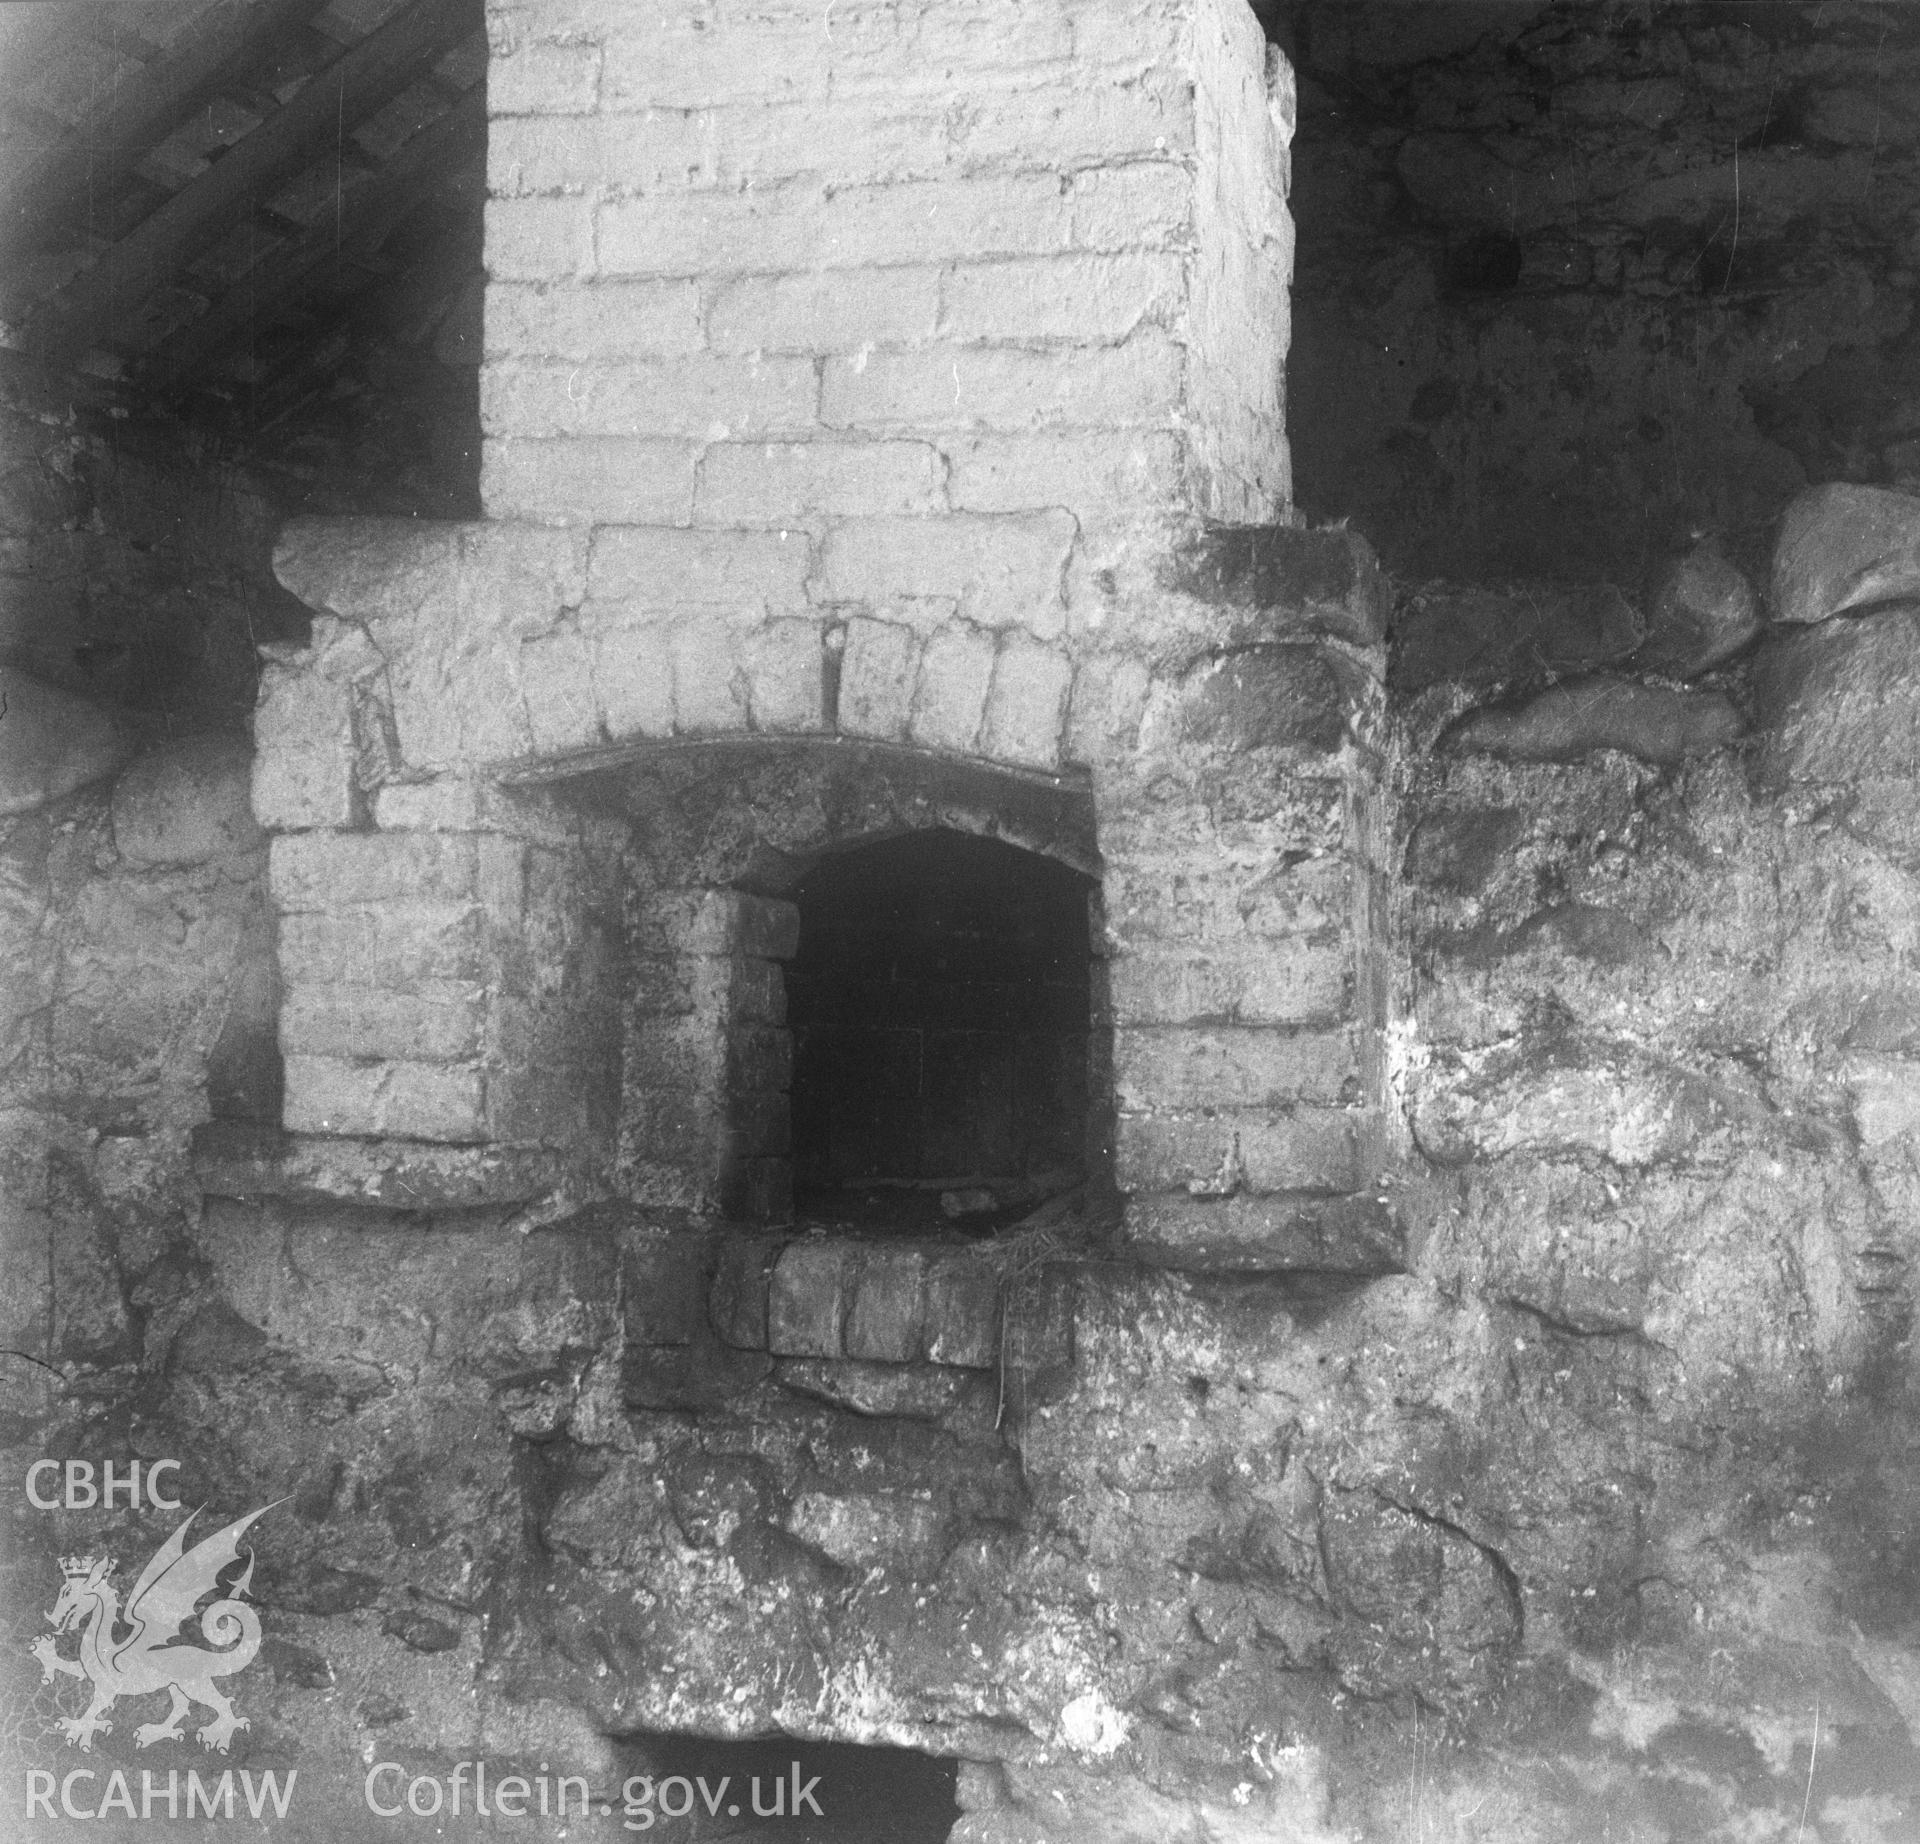 Black and white acetate negative showing interior detail of fireplace, Brithdir-Mawr, Cilcain.